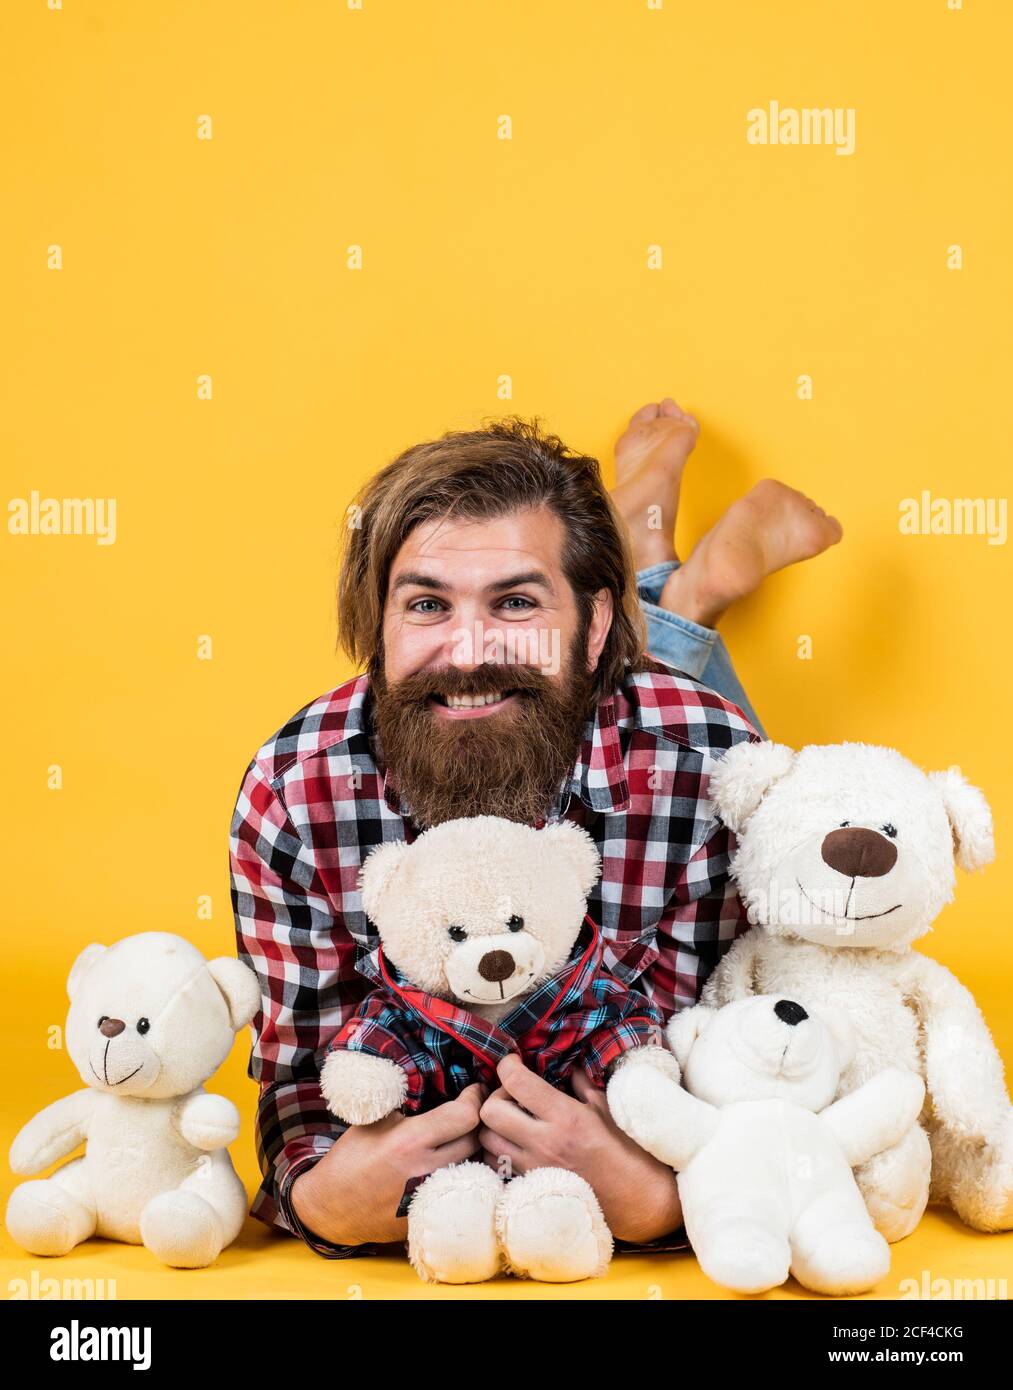 gift for her. Valentines day gift for beloved. Holiday celebration concept. Guy with happy face plays with soft toy. Childish mood concept. guy enjoy valentines day. best present ever. Stock Photo